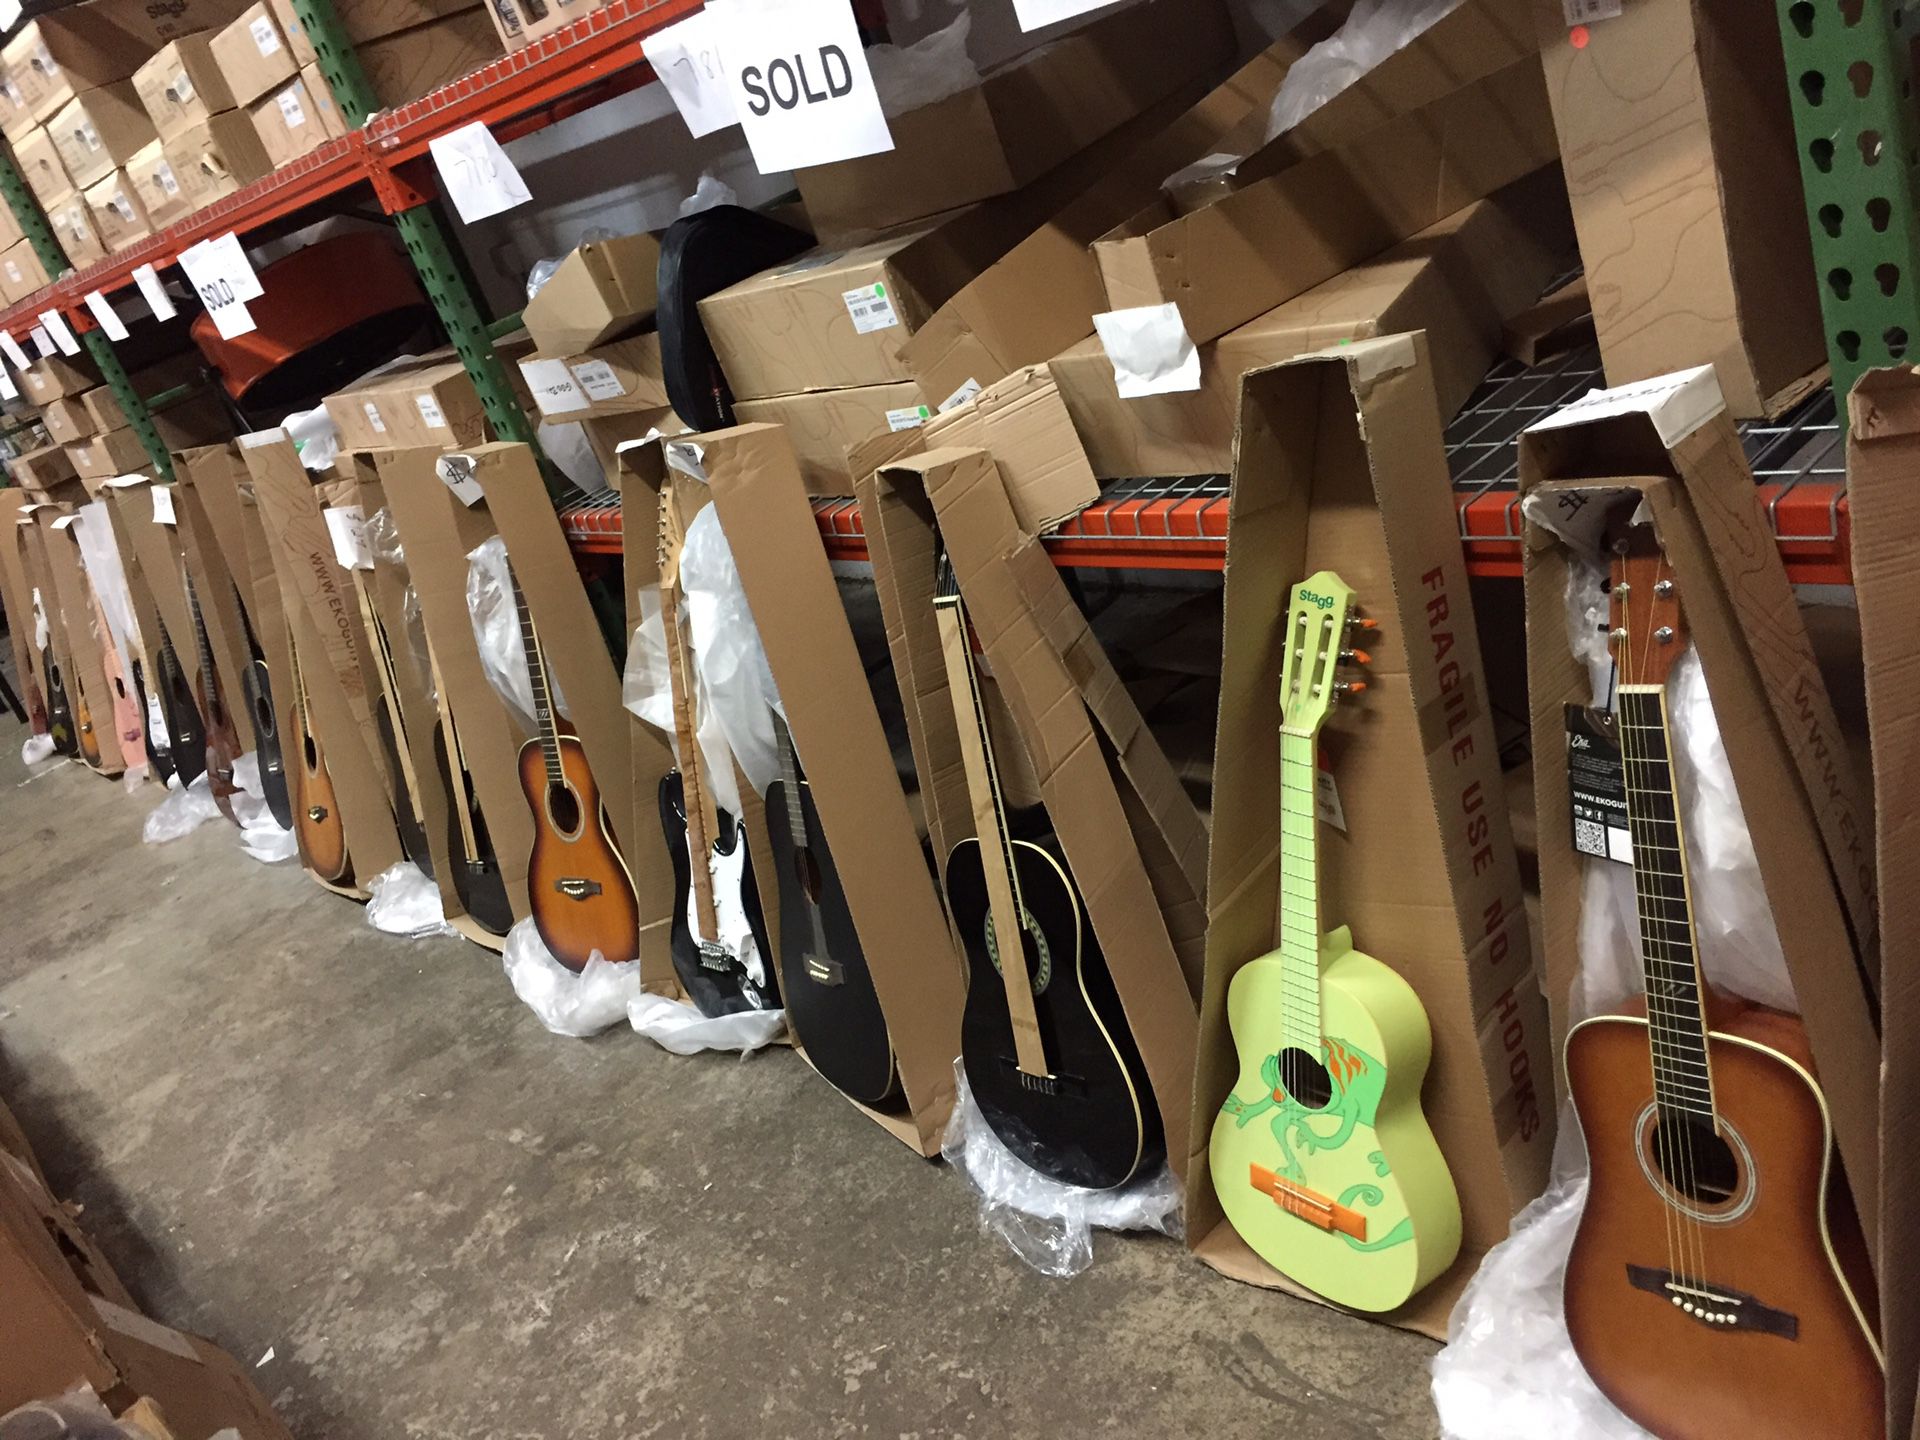 EKO Guitars For Sale One Day Only